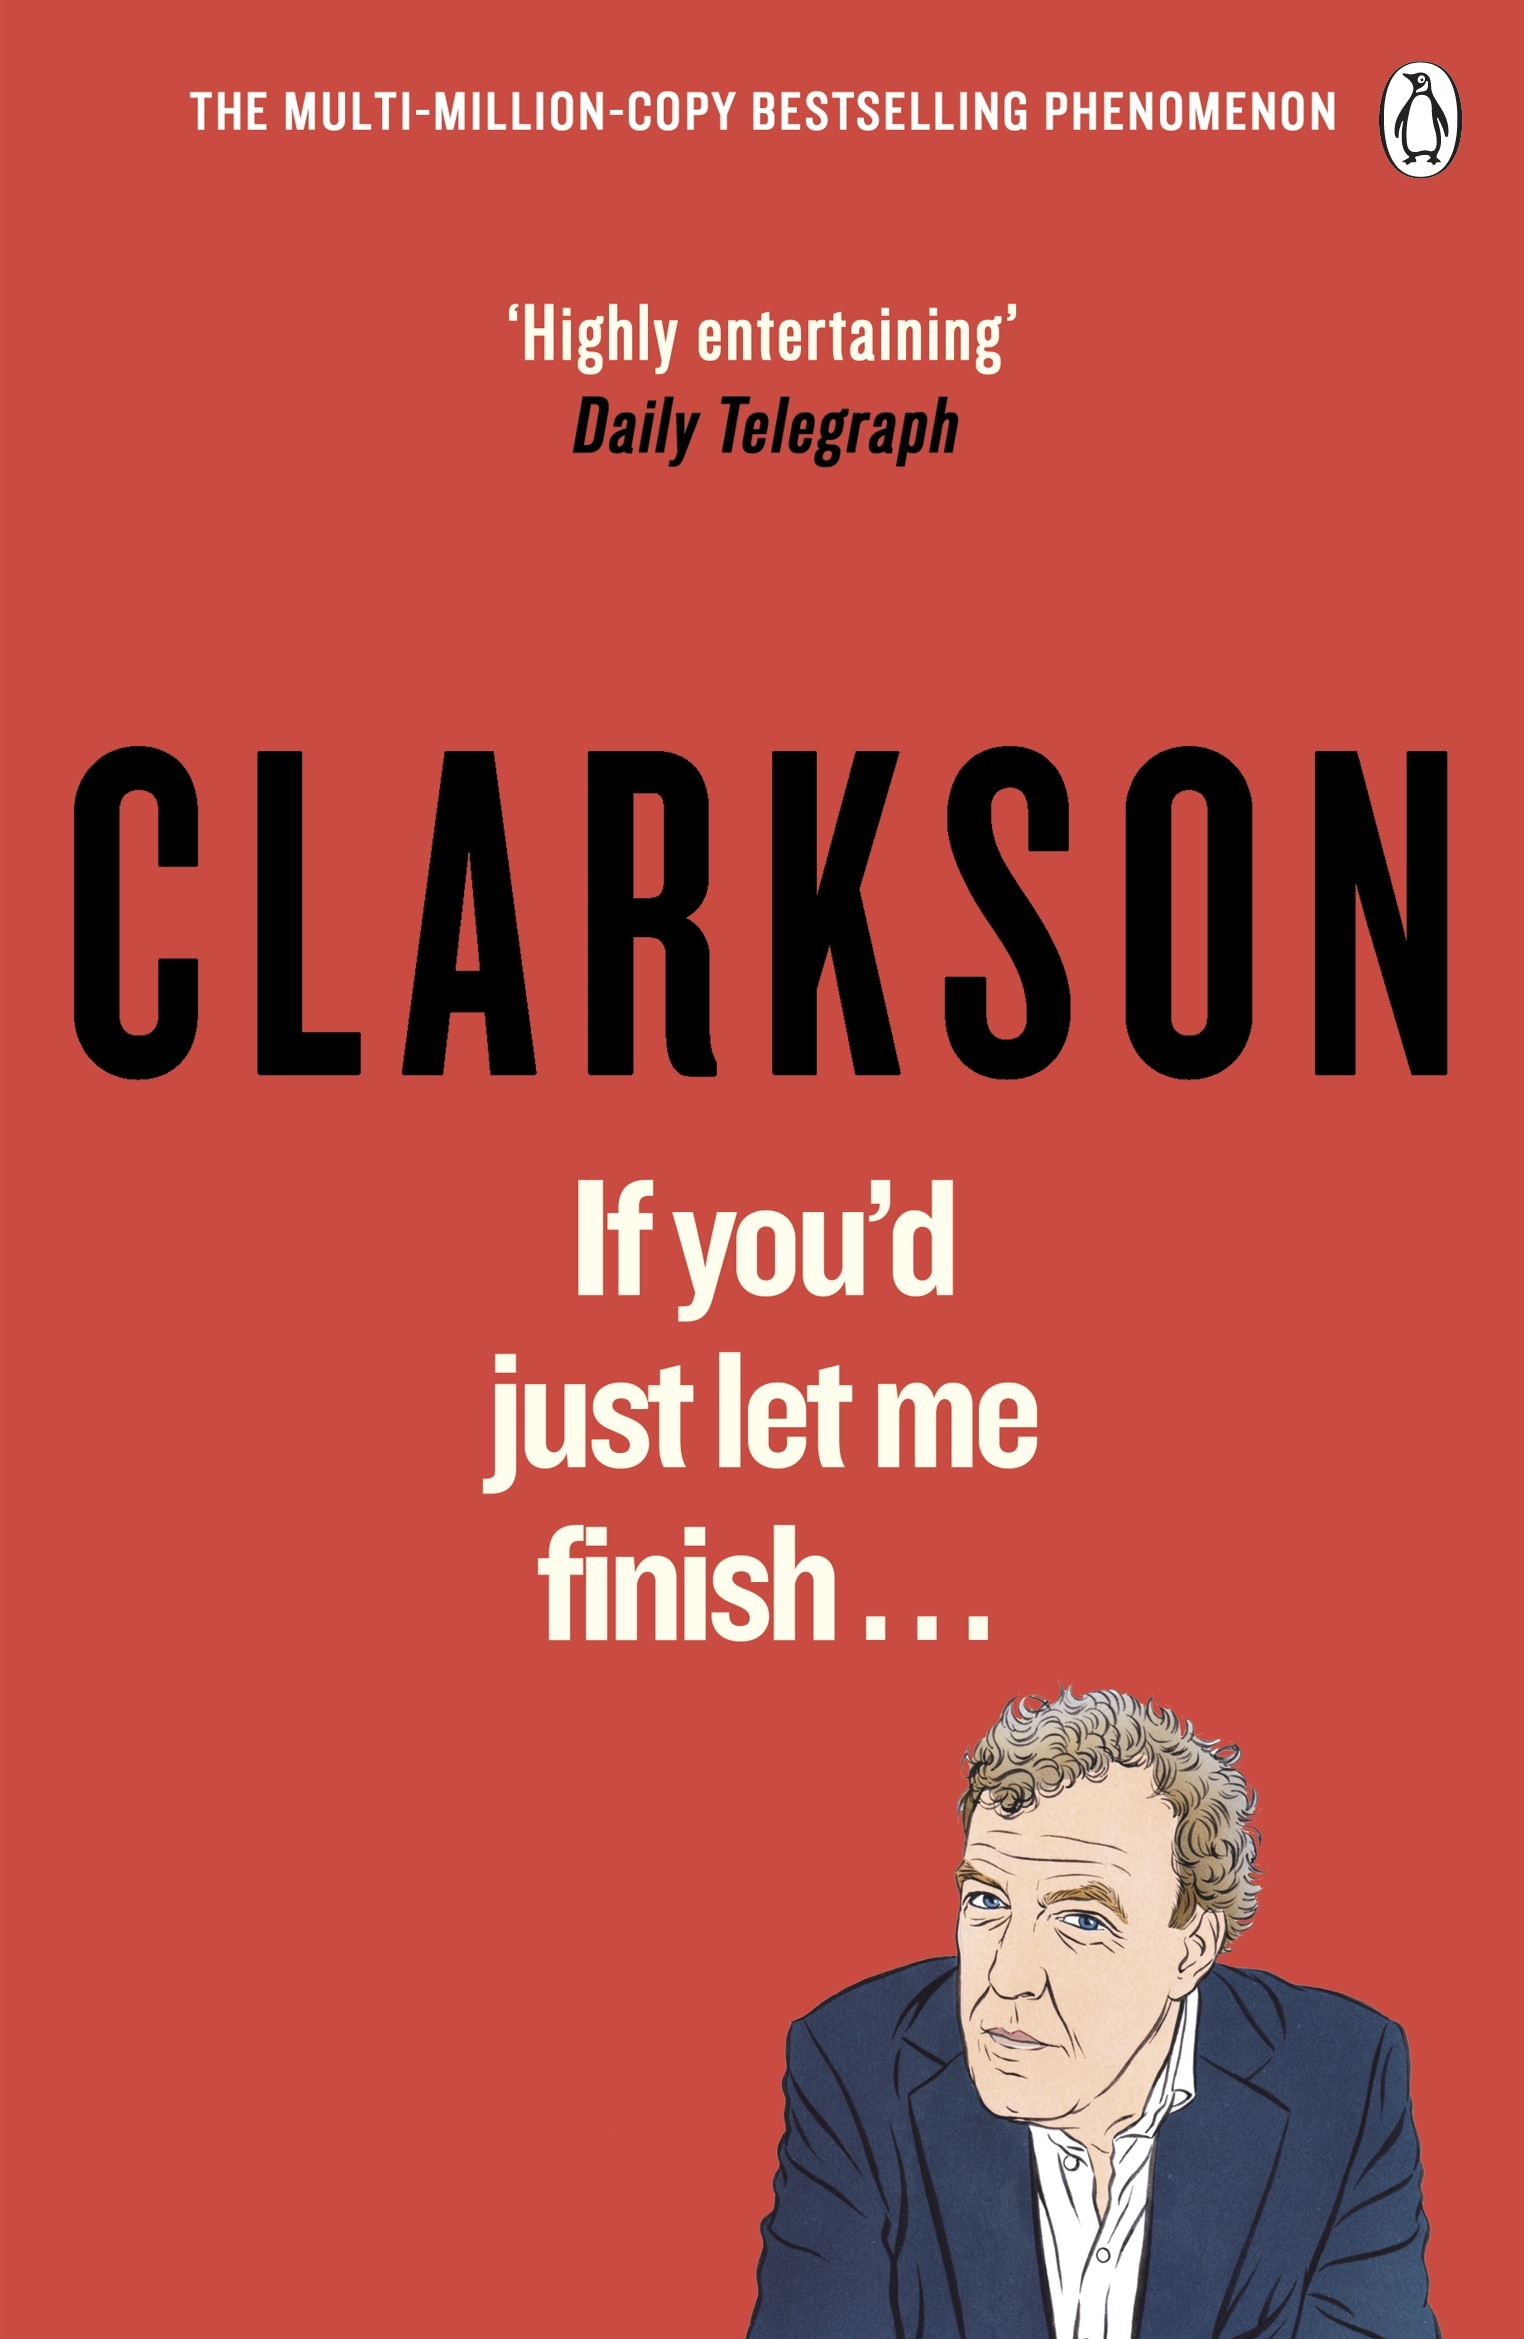 Book “If You’d Just Let Me Finish” by Jeremy Clarkson — May 30, 2019